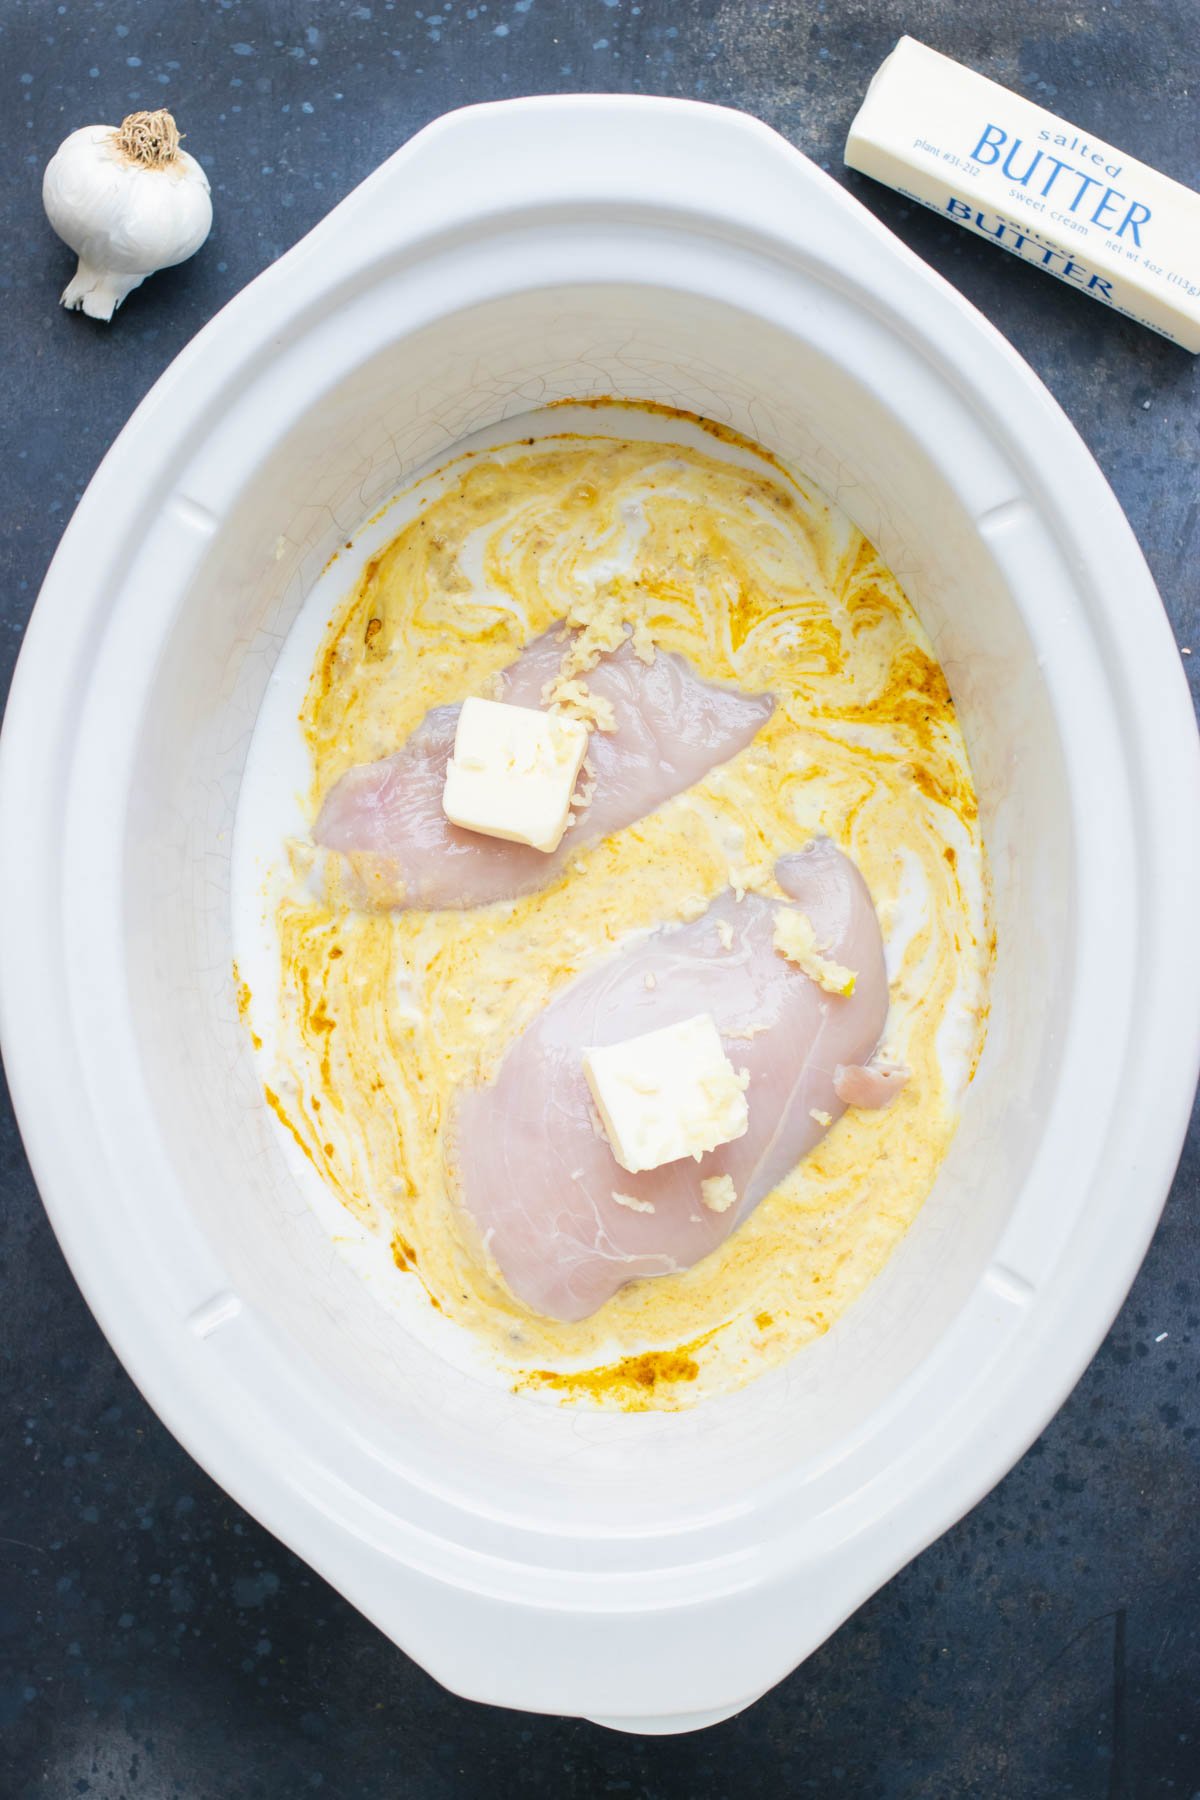 Chicken and butter are added to the slow cooker bowl.